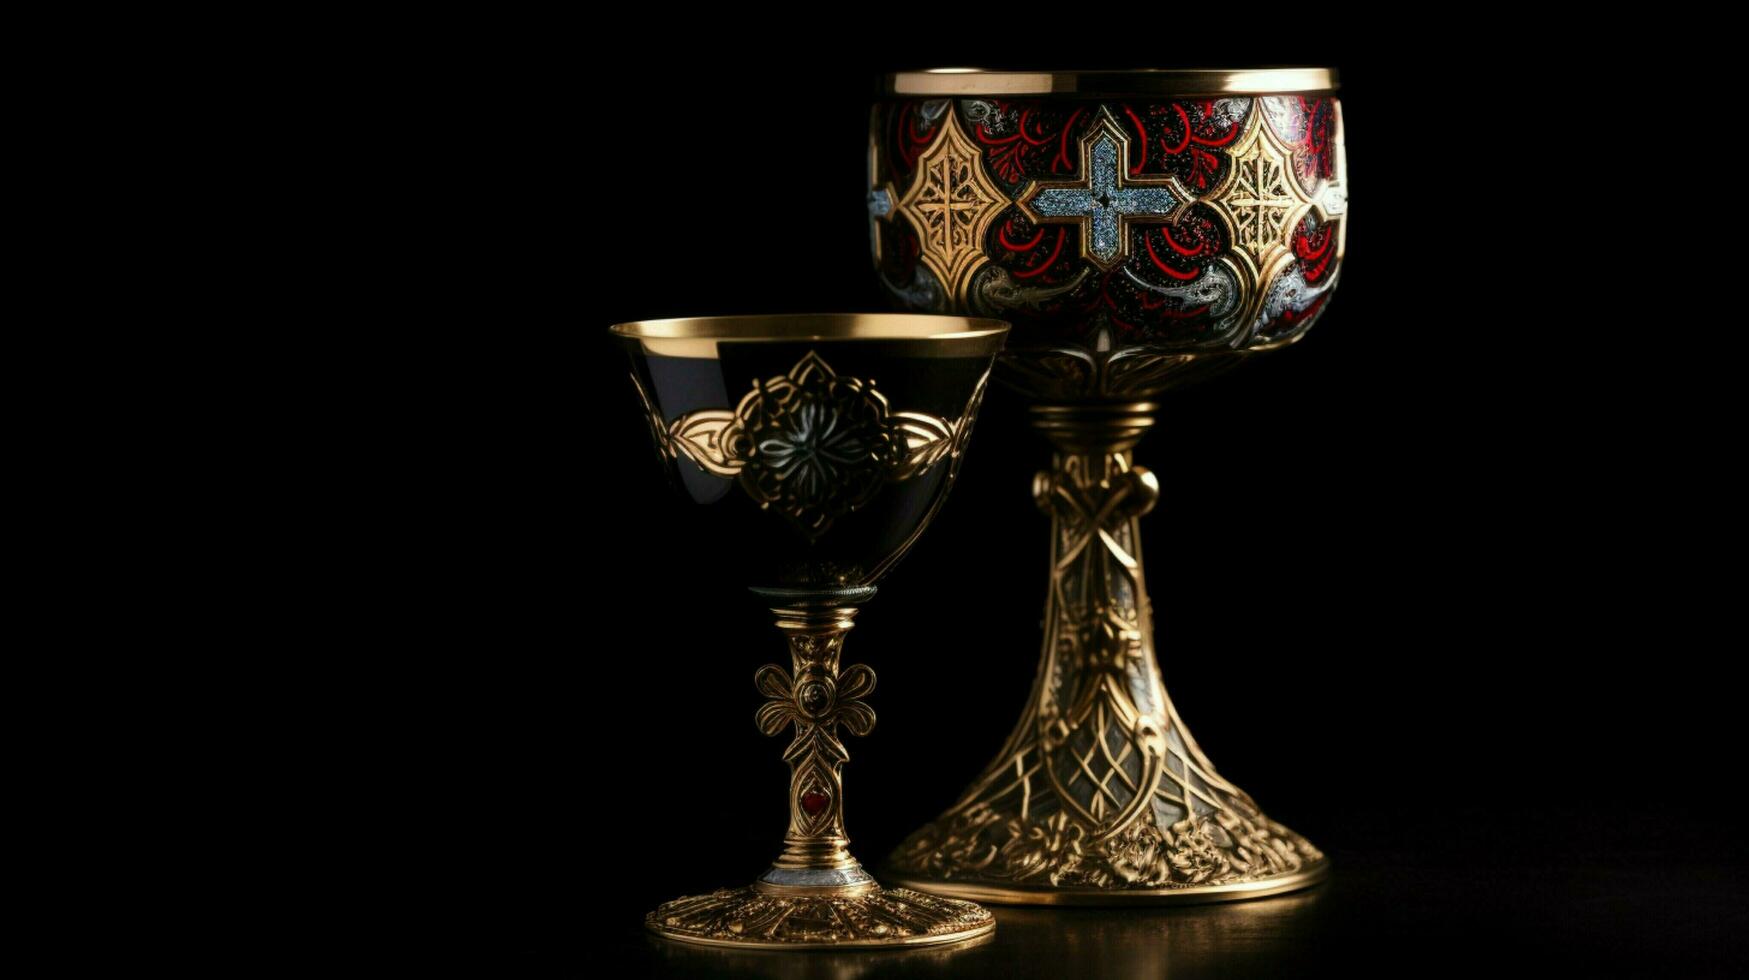 christian chalice wine and cross on black background photo